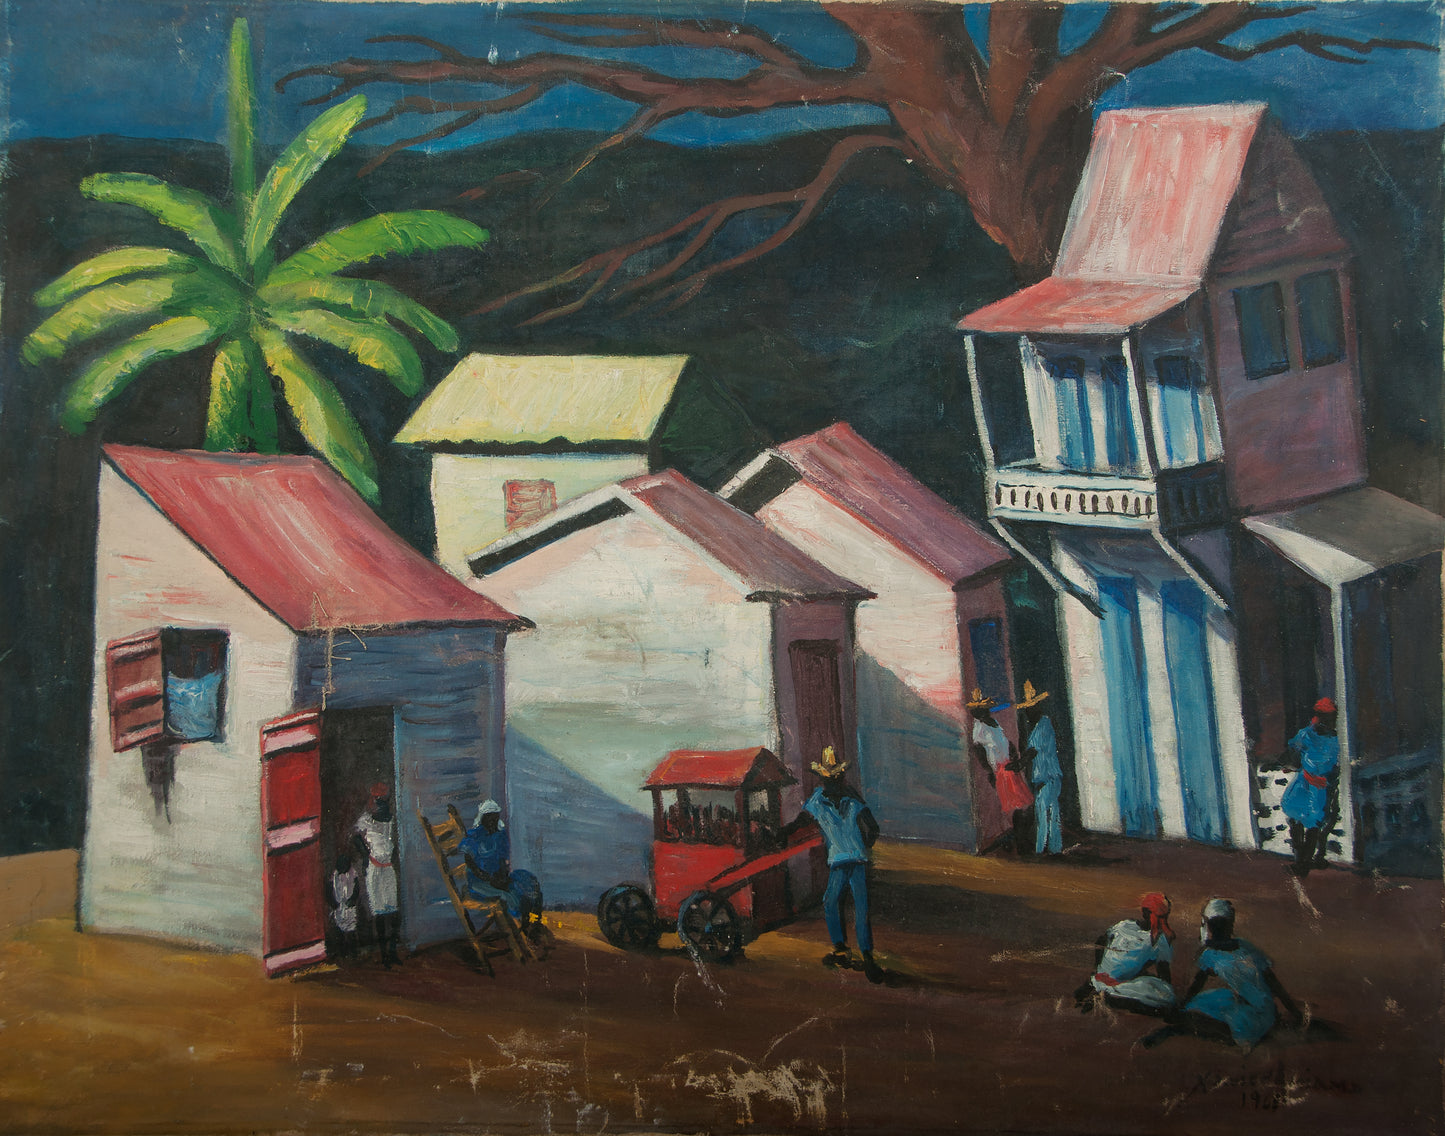 Xavier Amiama 24"x30" Houses 1968 Oil On Canvas Painting #3GSN-Fondation Marie & Georges S. Nader